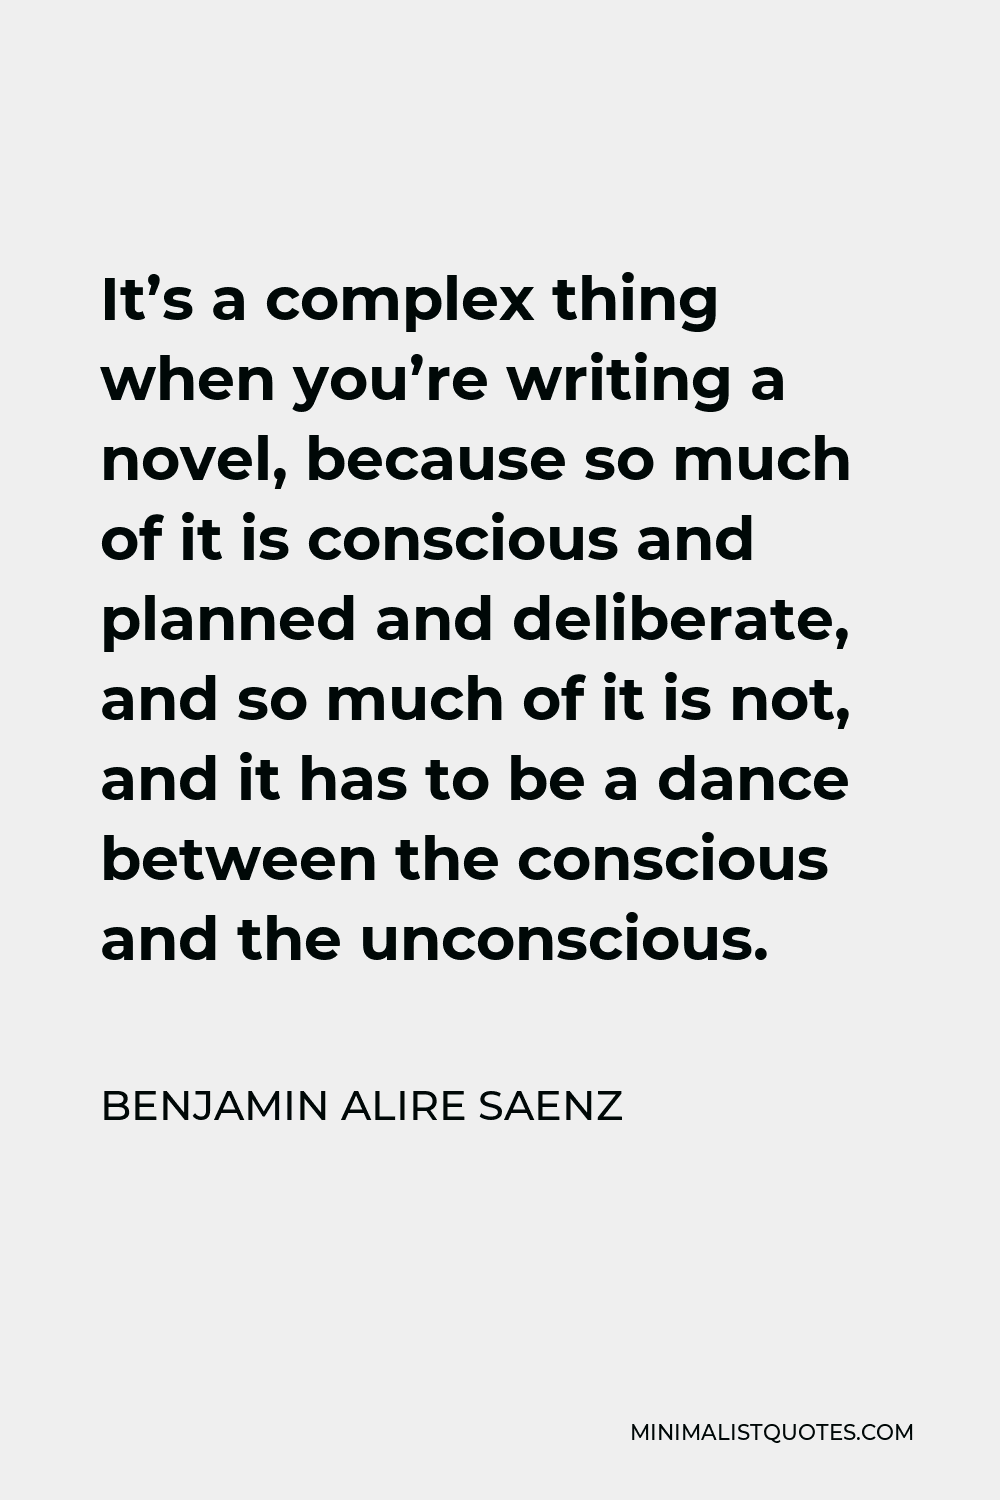 Benjamin Alire Saenz Quote - It’s a complex thing when you’re writing a novel, because so much of it is conscious and planned and deliberate, and so much of it is not, and it has to be a dance between the conscious and the unconscious.